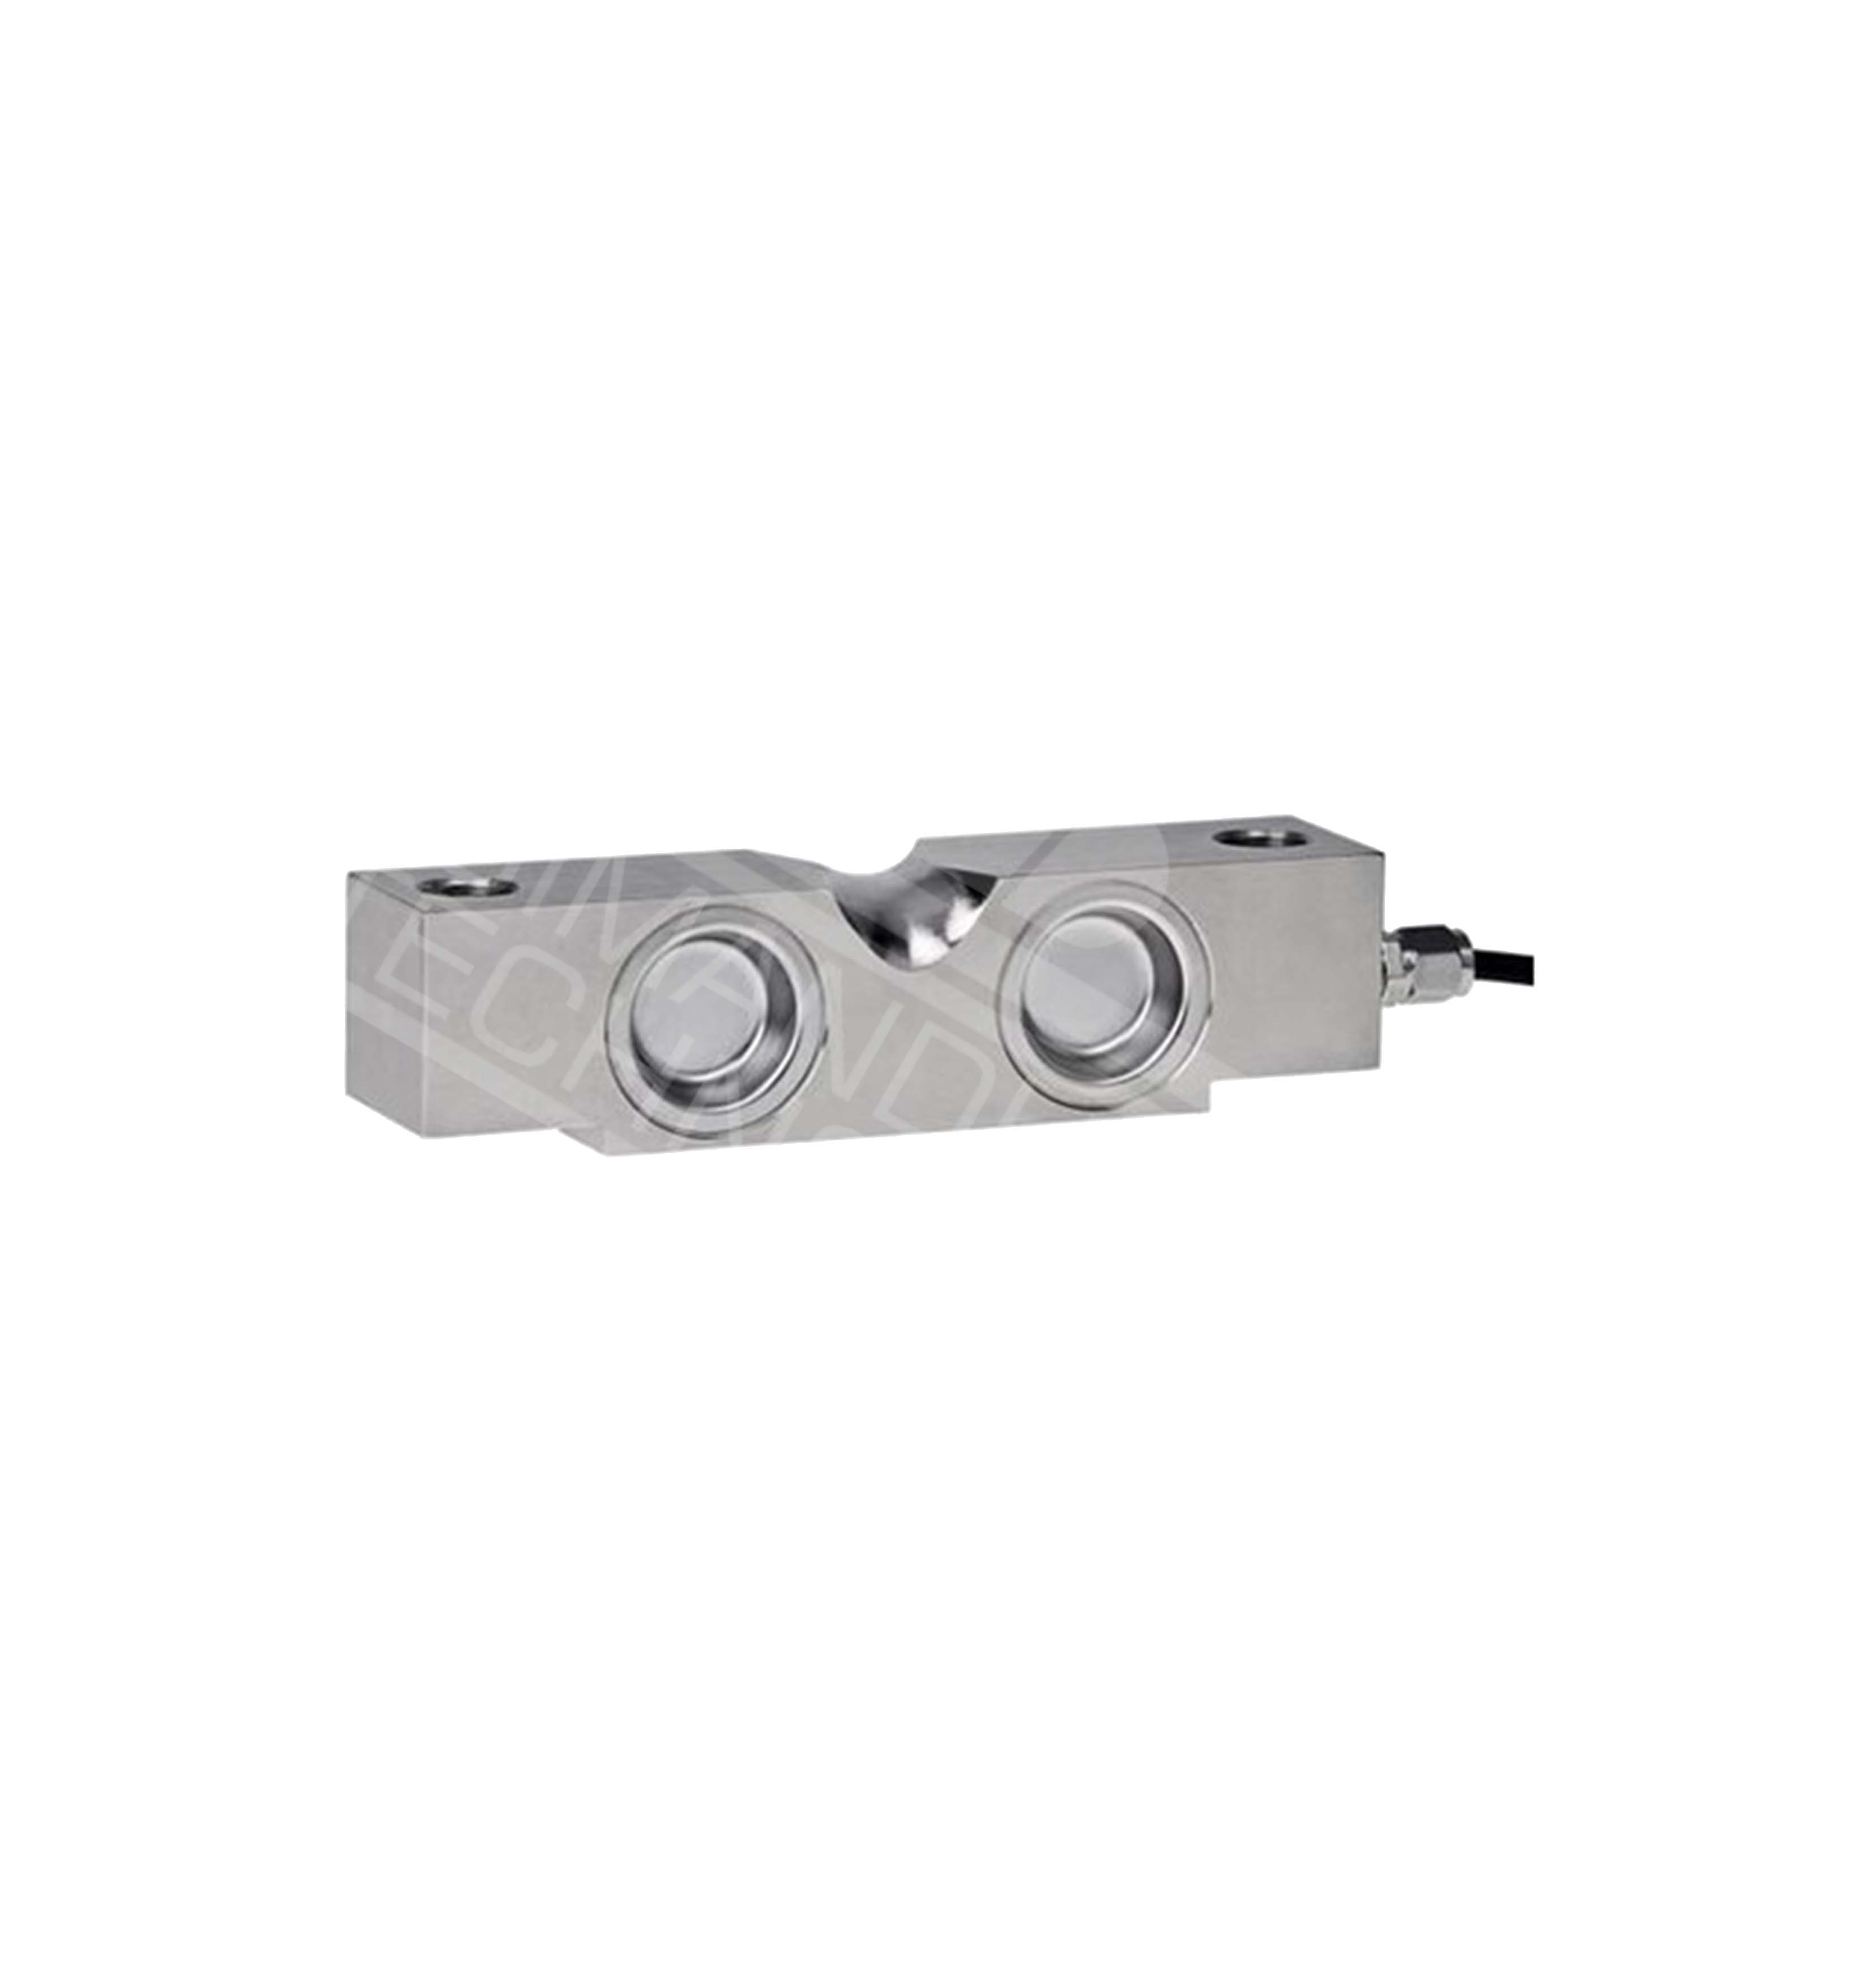 ADI-70310 Double Ended Shear Beam Load Cell